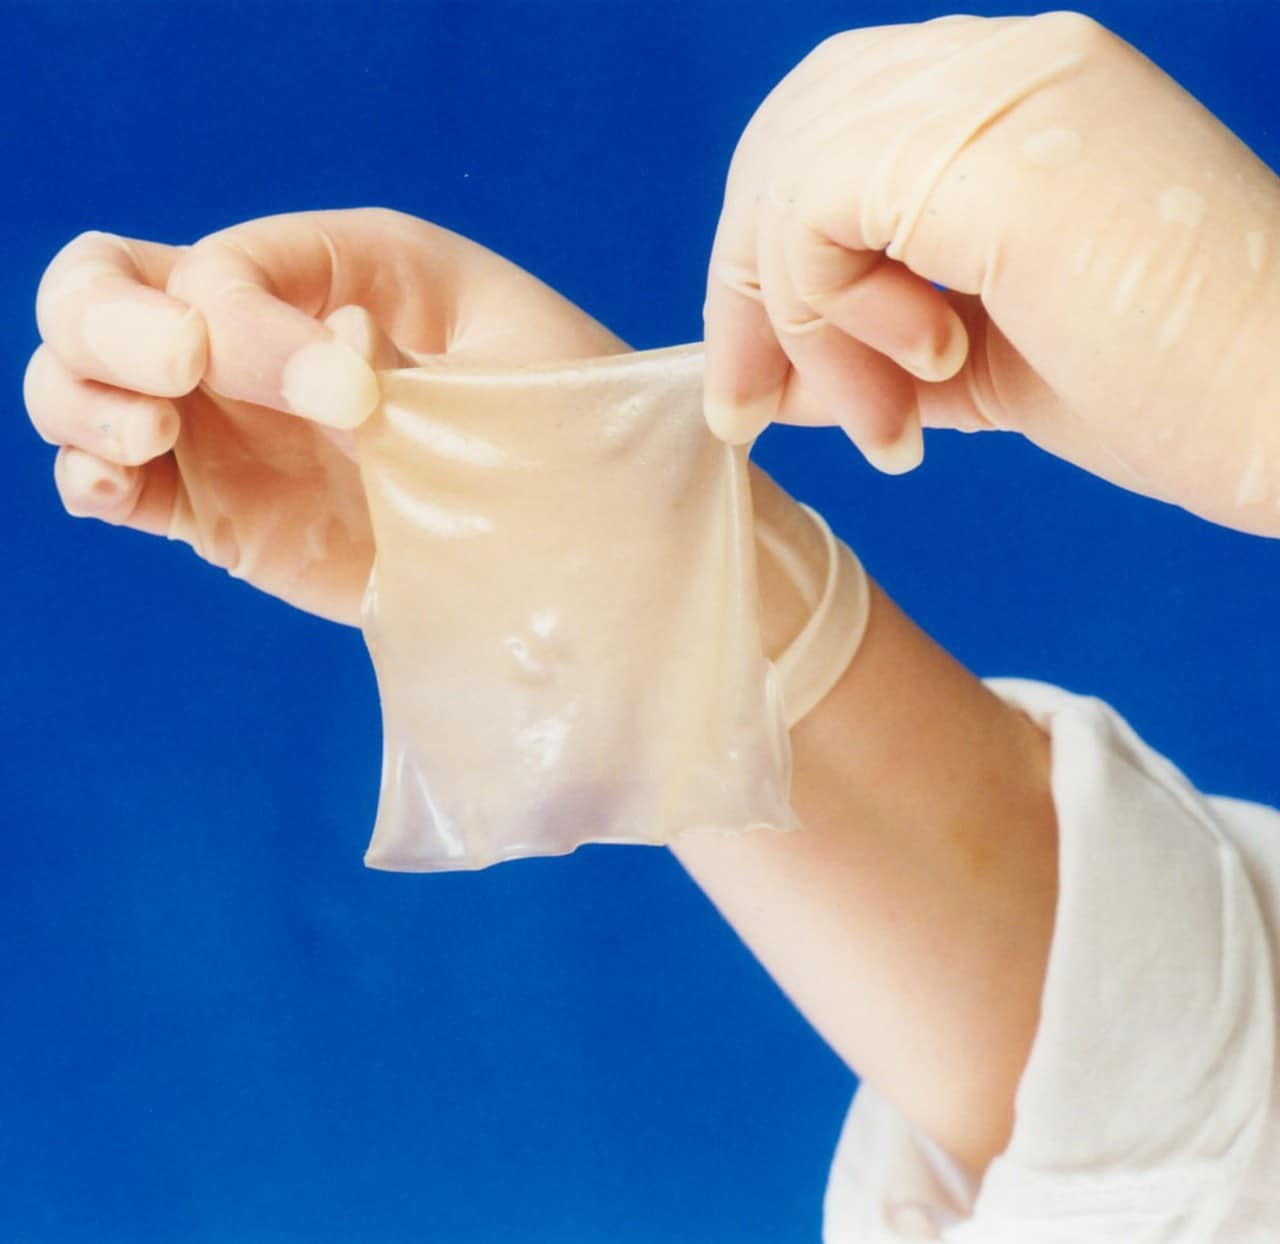 Gloved hands holding up elastin sheets for tissue repair.